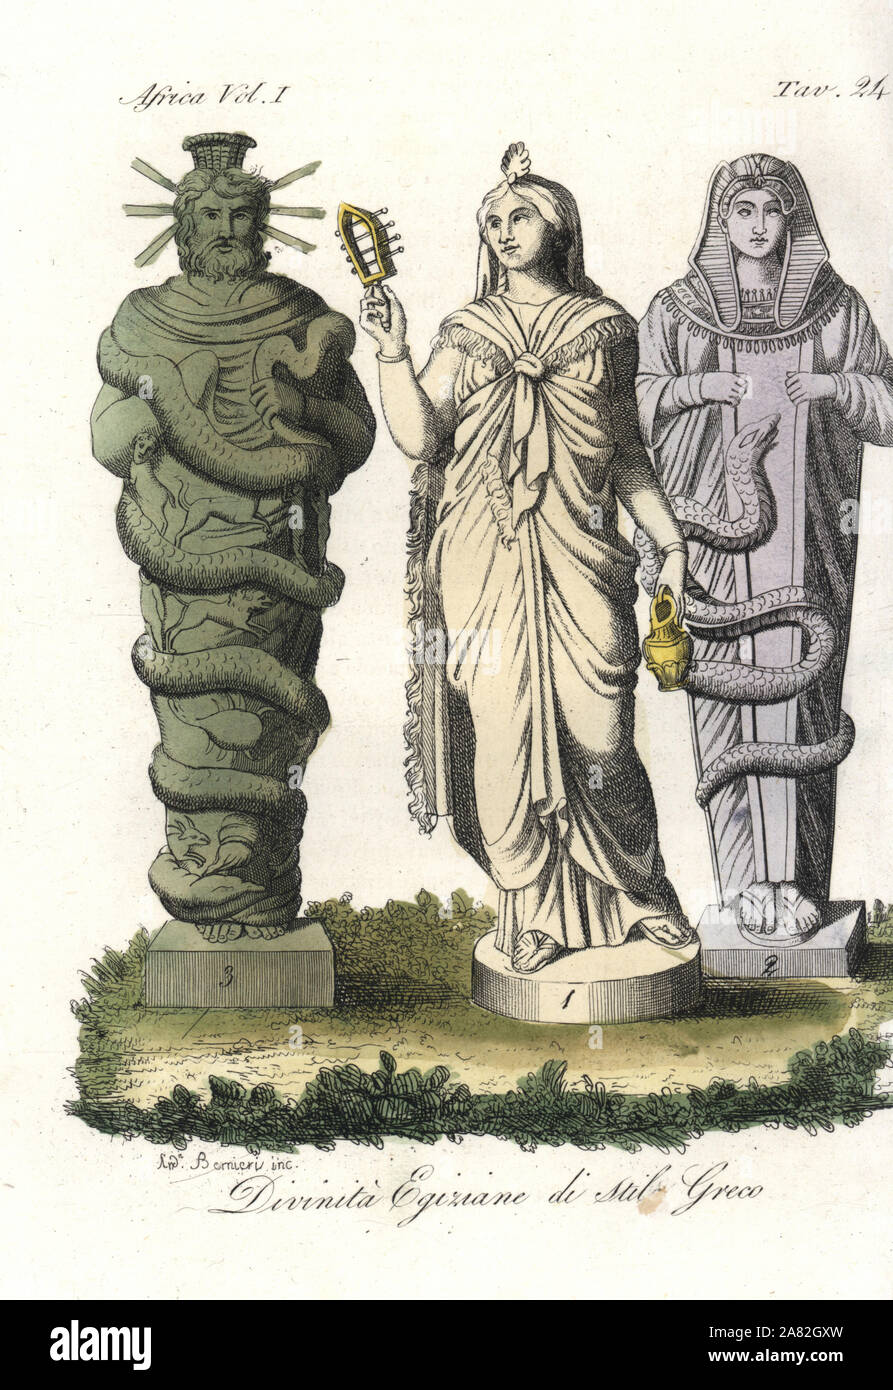 Egyptian gods in the Graeco-Roman style: Isis from a Greek temple 1, Isis with snake from a Roman temple, and Serapis with snake from a Greek temple 3. Handcoloured copperplate engraving by Andrea Bernieri from Giulio Ferrrario's Costumes Antique and Modern of All Peoples (Il Costume Antico e Moderno di Tutti i Popoli), Florence, 1843. Stock Photo